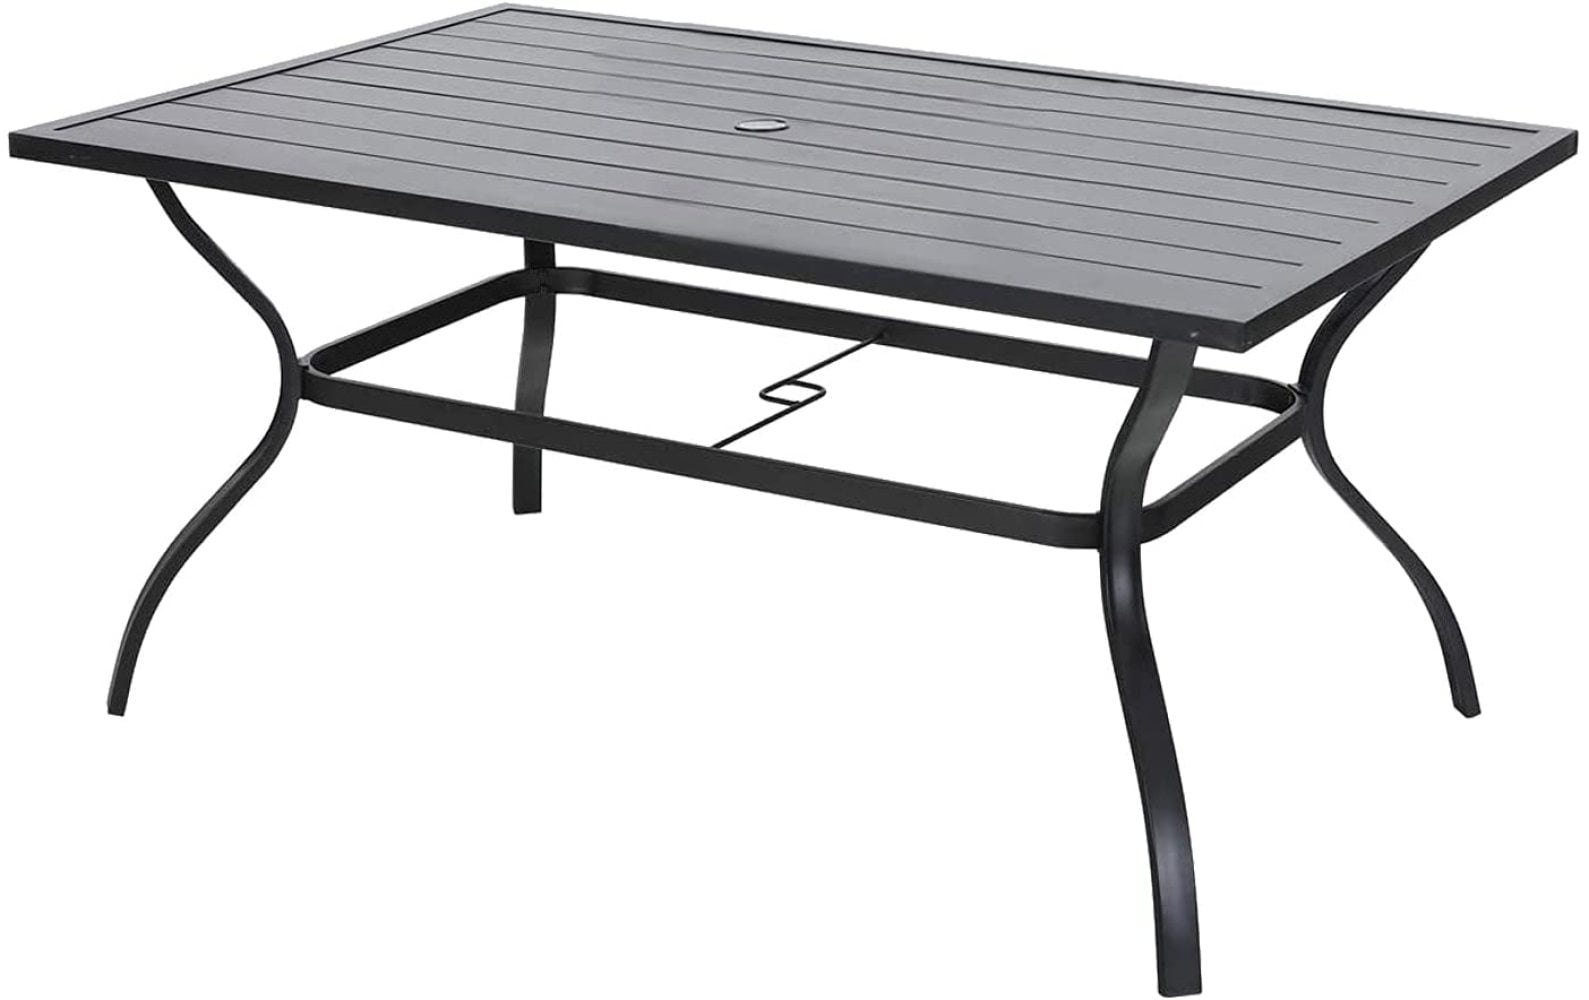 Metal Steel Frame Rectangle Table with Adjustable Umbrella Hole VICLLAX Patio Dining Table Outdoor Dining Table for 6 